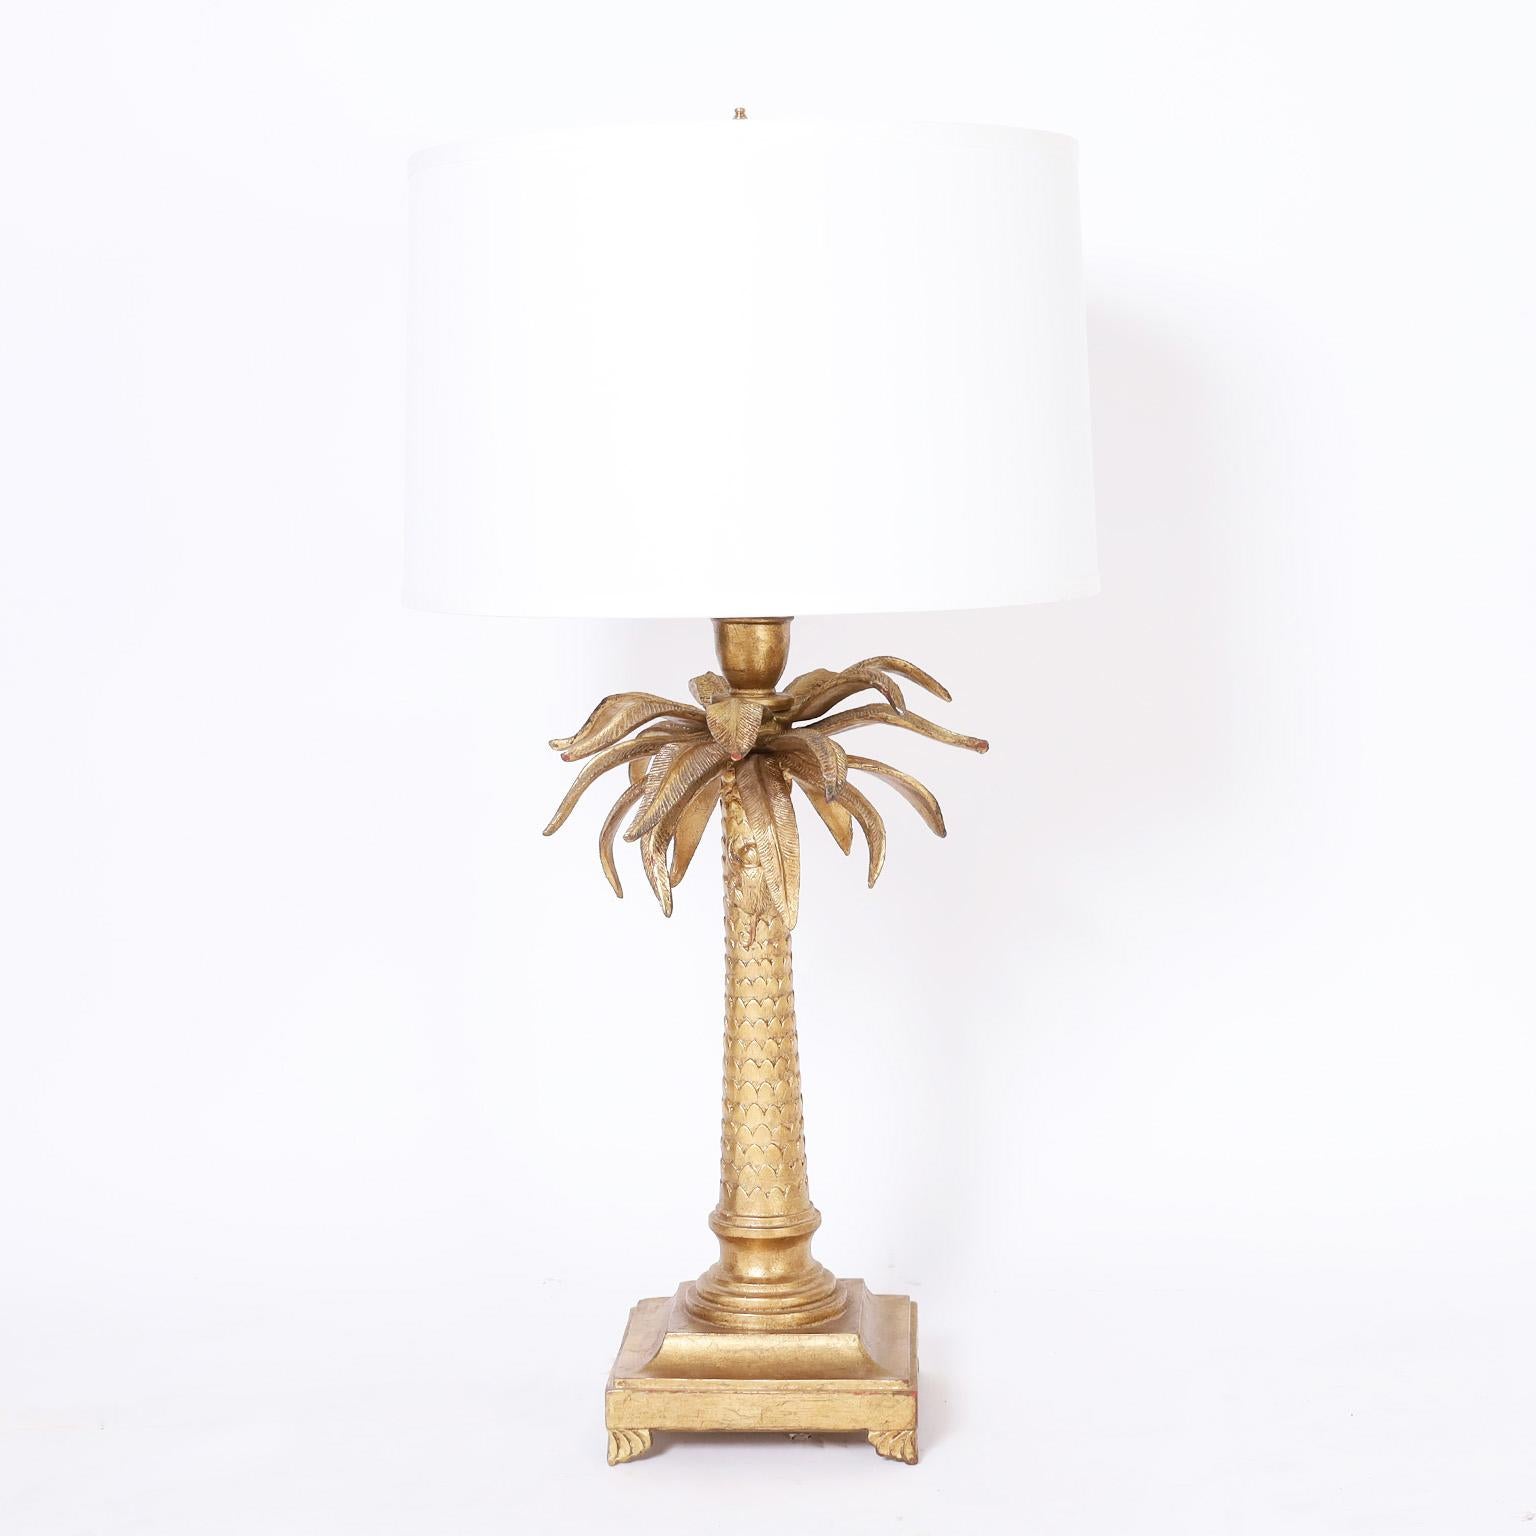 Pair of mid century regency style palm tree table lamps crafted in wood and composition in a classic form having a worn gold gilt finish with slightly exposed red primer.